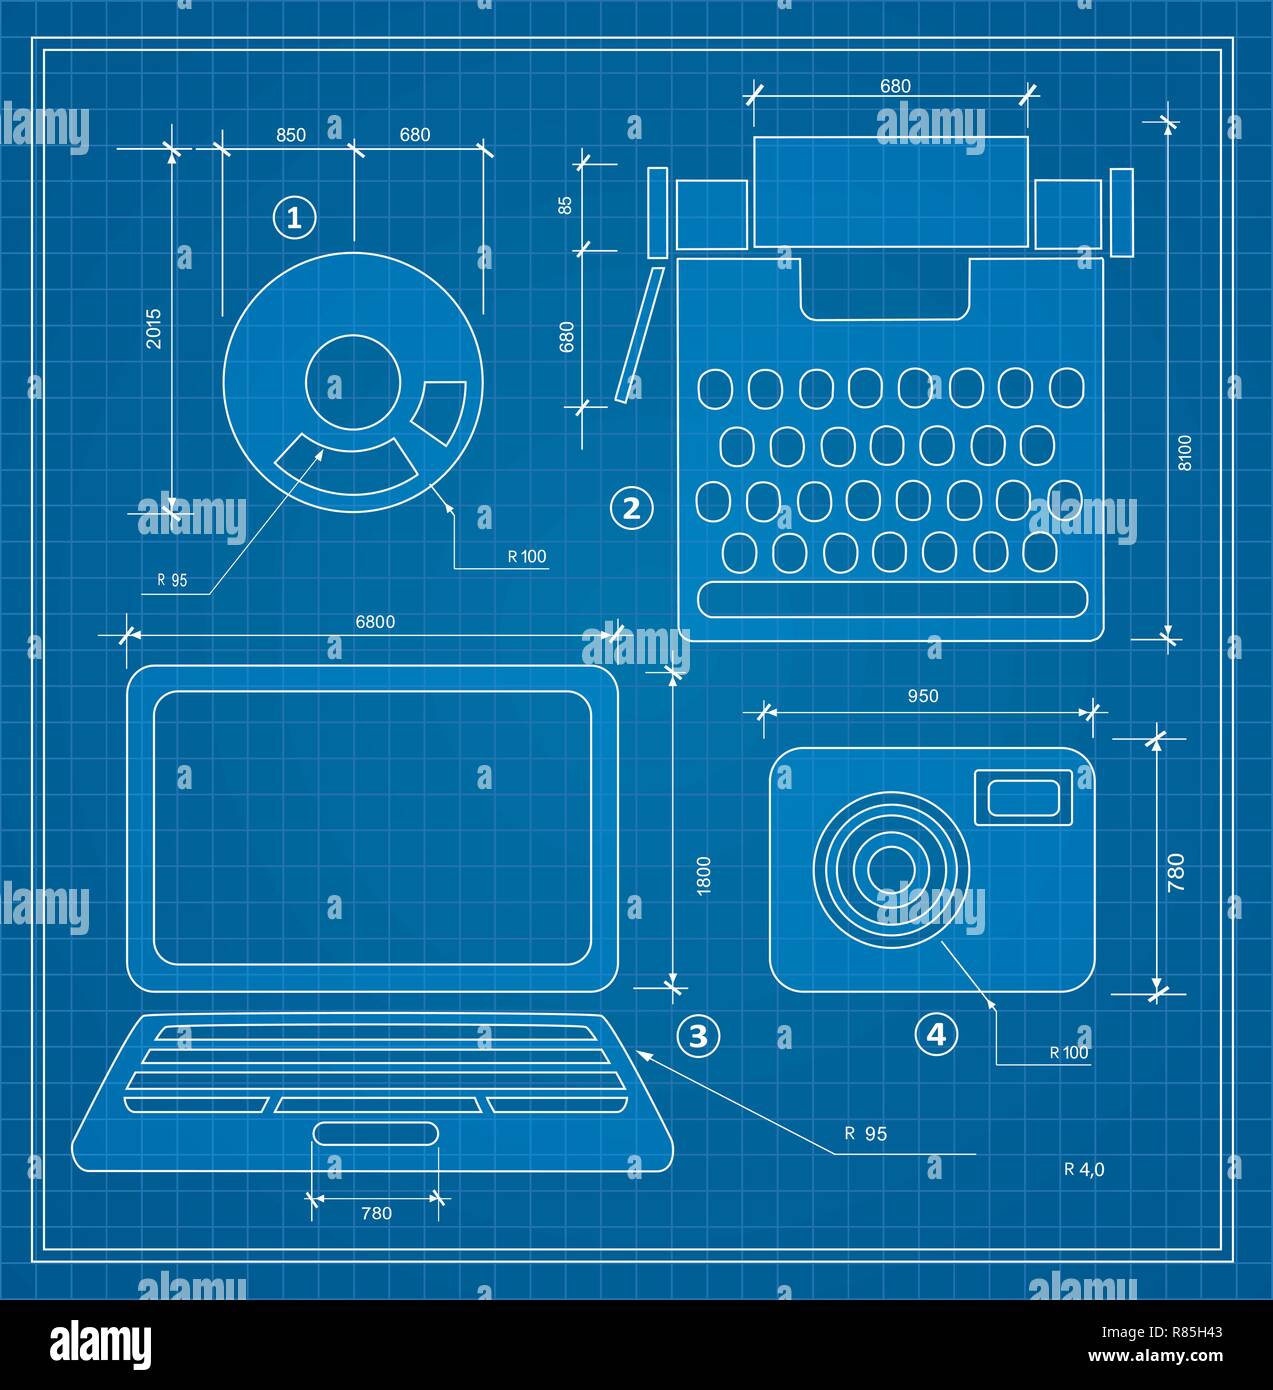 Blueprint plan outline draft personal computer set. Drawing plan layout of industrial and household items for creativity, writing and design Stock Vector